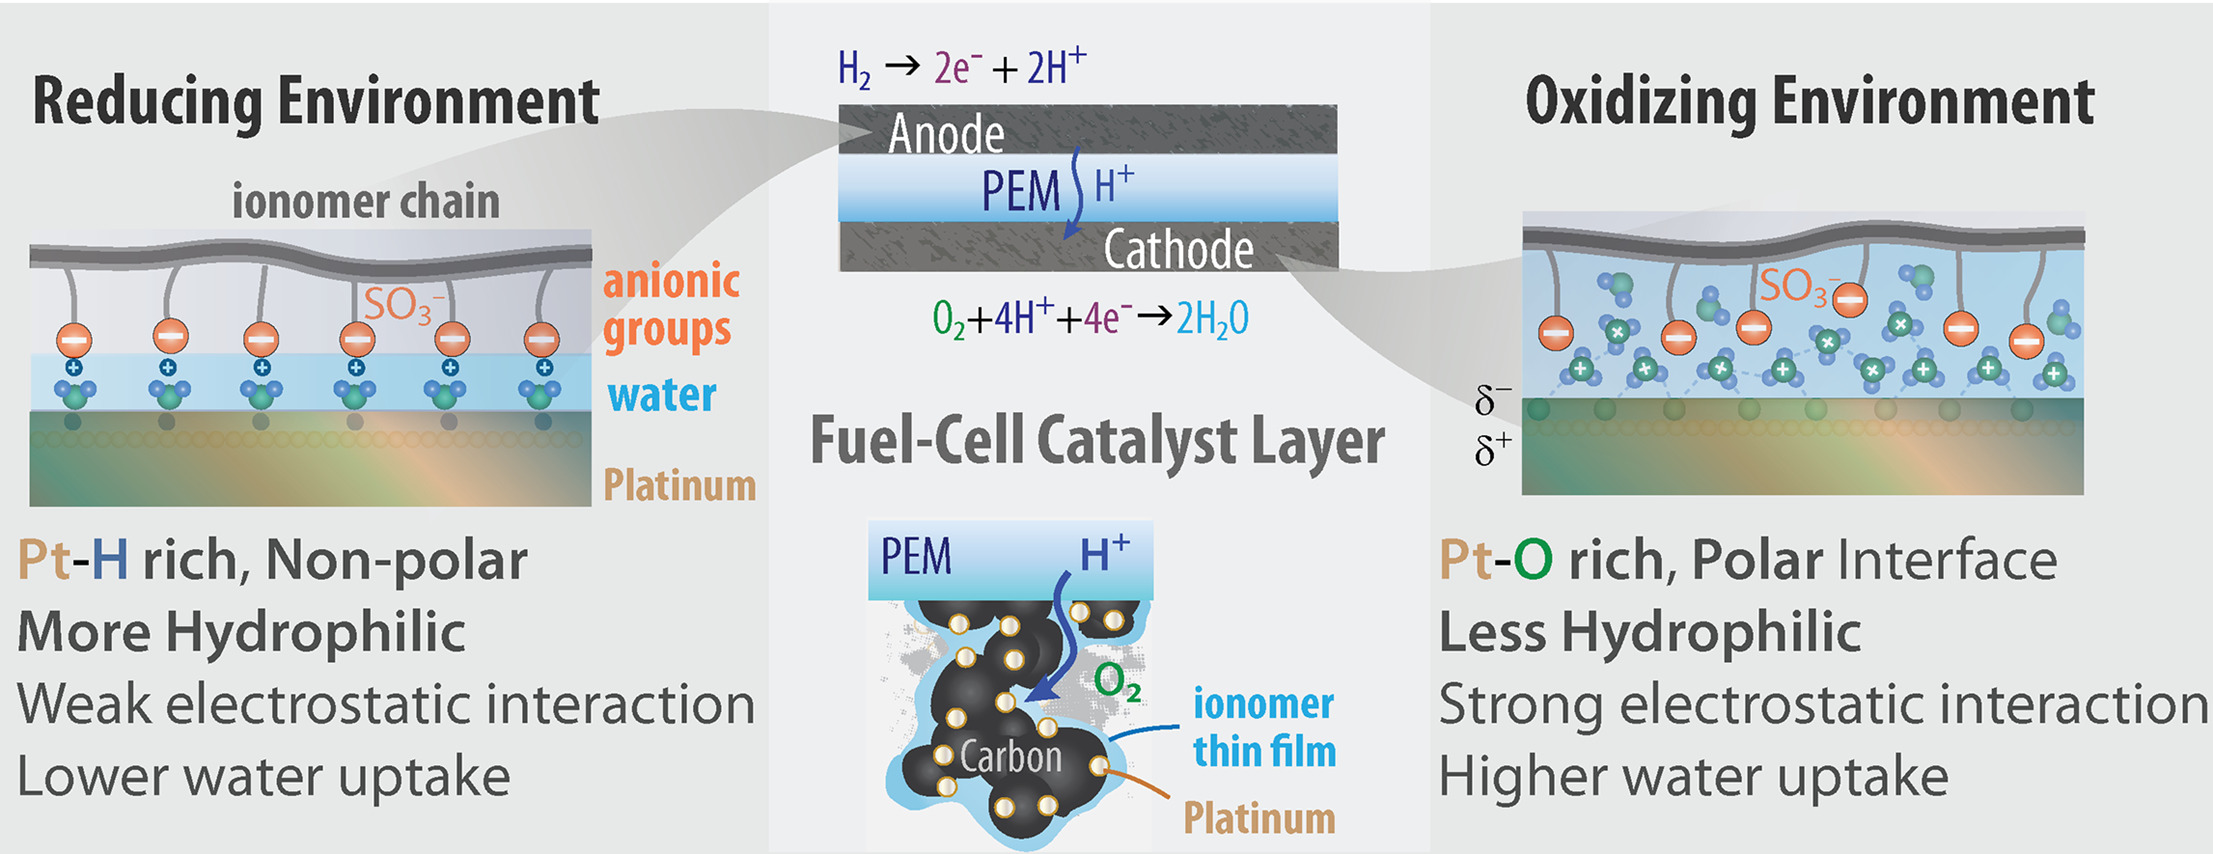 Graphical abstract for the paper "Exploring substrate/ionomer interaction under oxidizing and reducing environments"